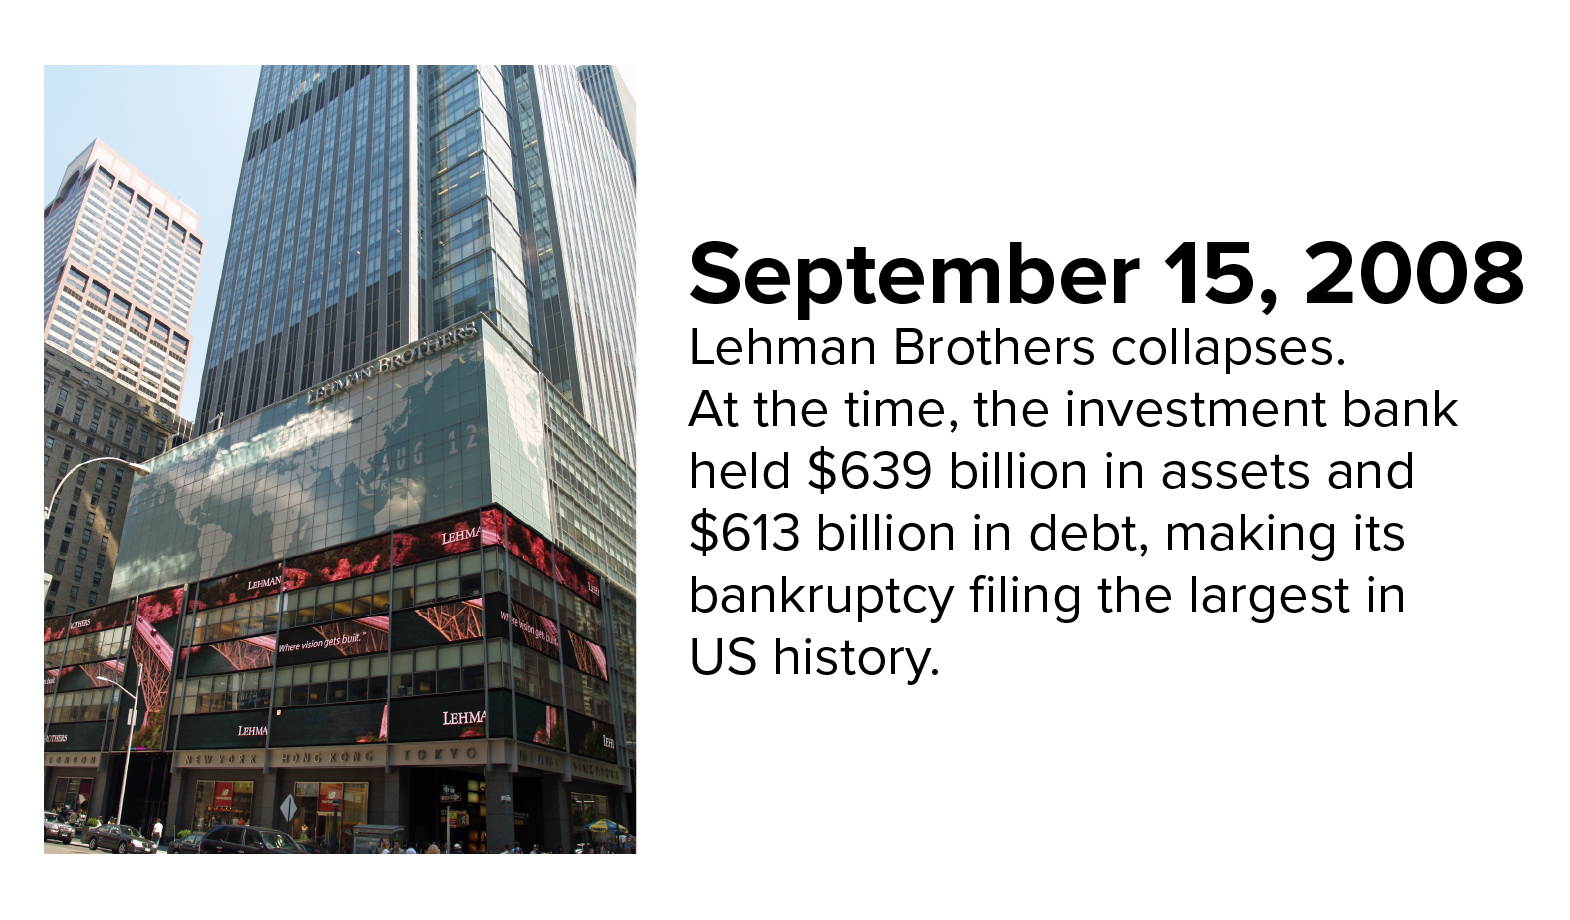 Photo of Lehman Brothers building. The investment bank collapsed on September 15, 2008.